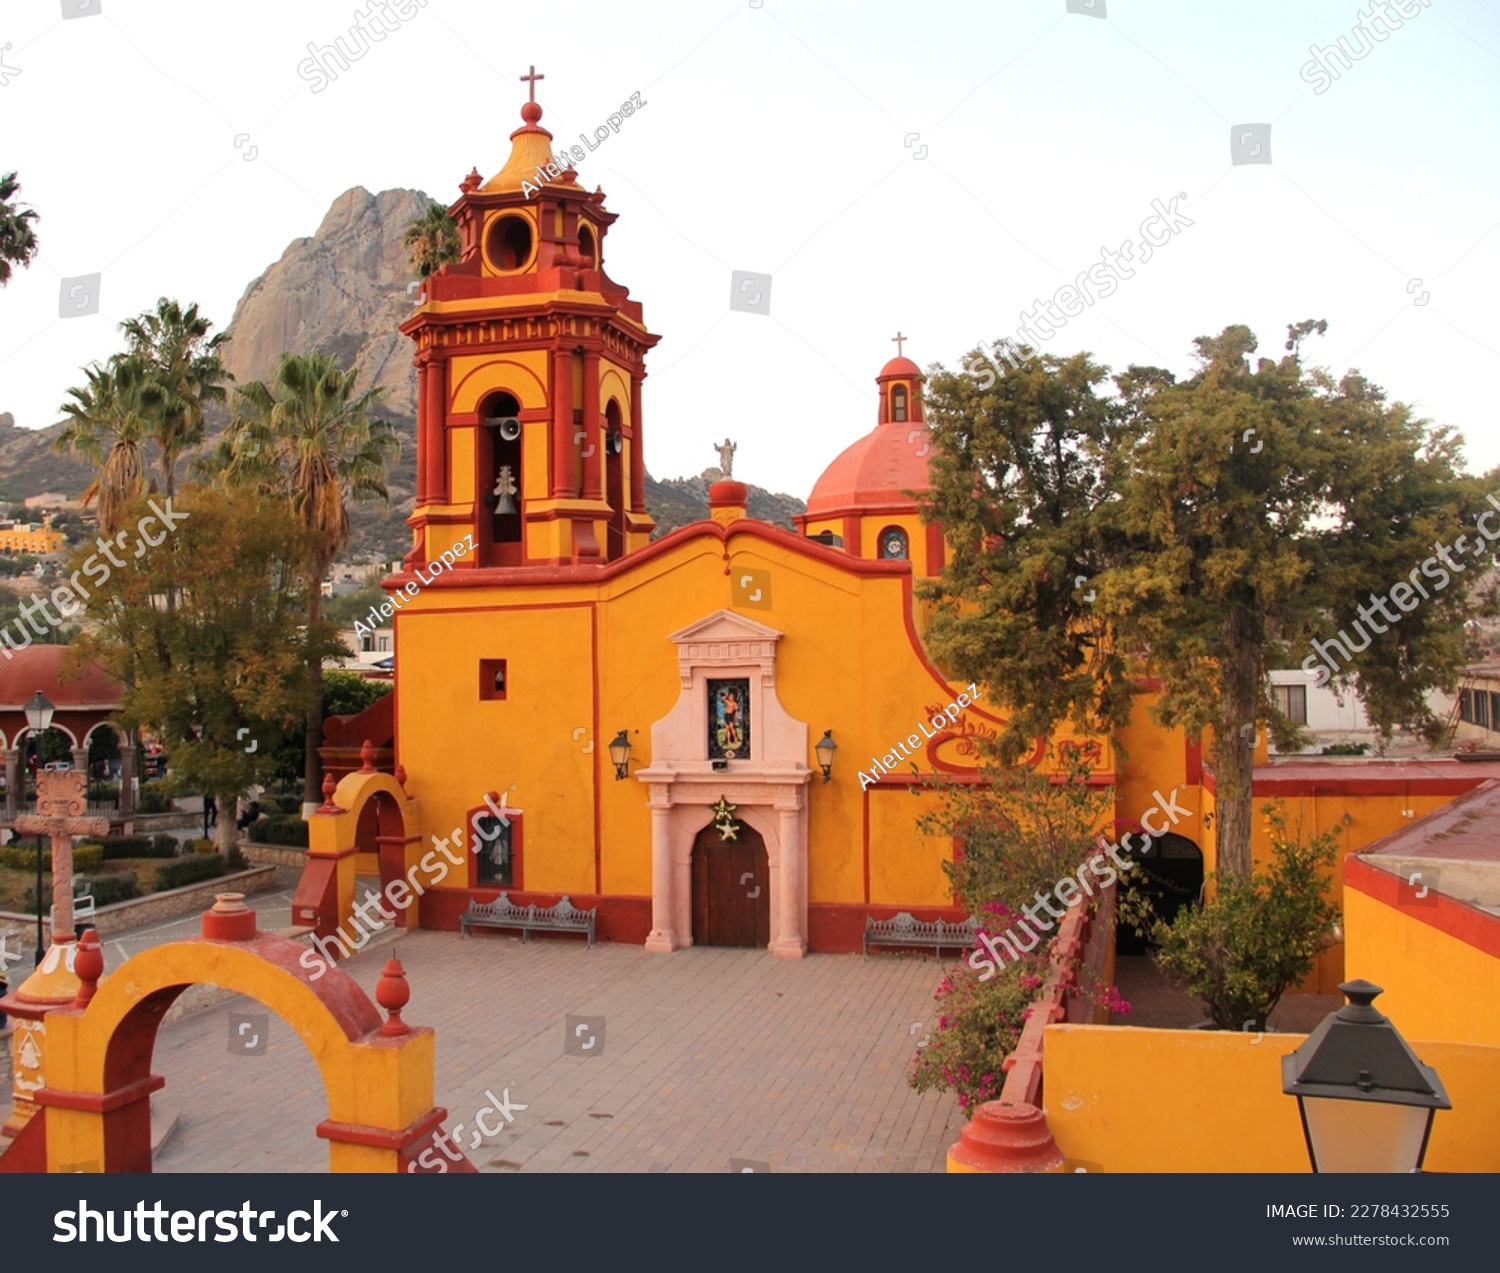 Magical town Peña de Bernal in Queretaro Mexico in the center The Temple of San Sebastian is located in the Main Square surrounded by gardens #2278432555